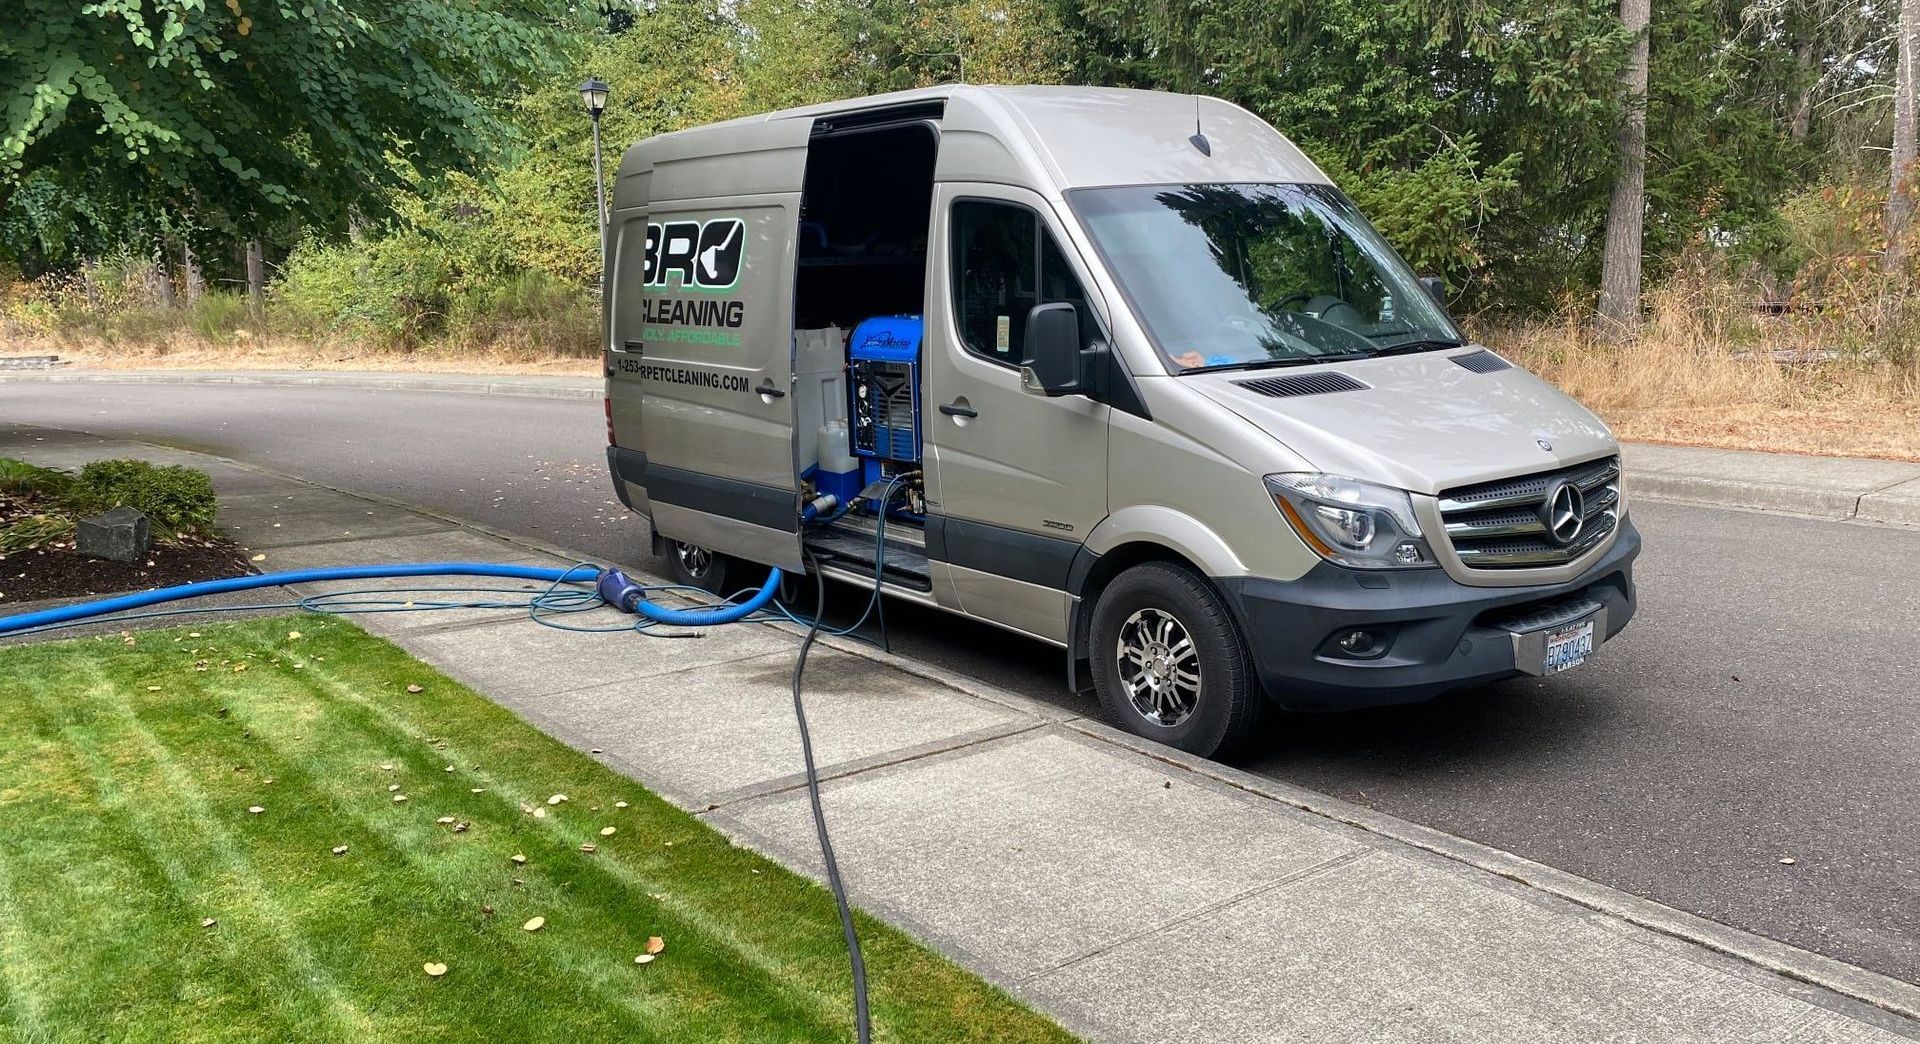 Residential Pressure washing service in Maple Valley, WA